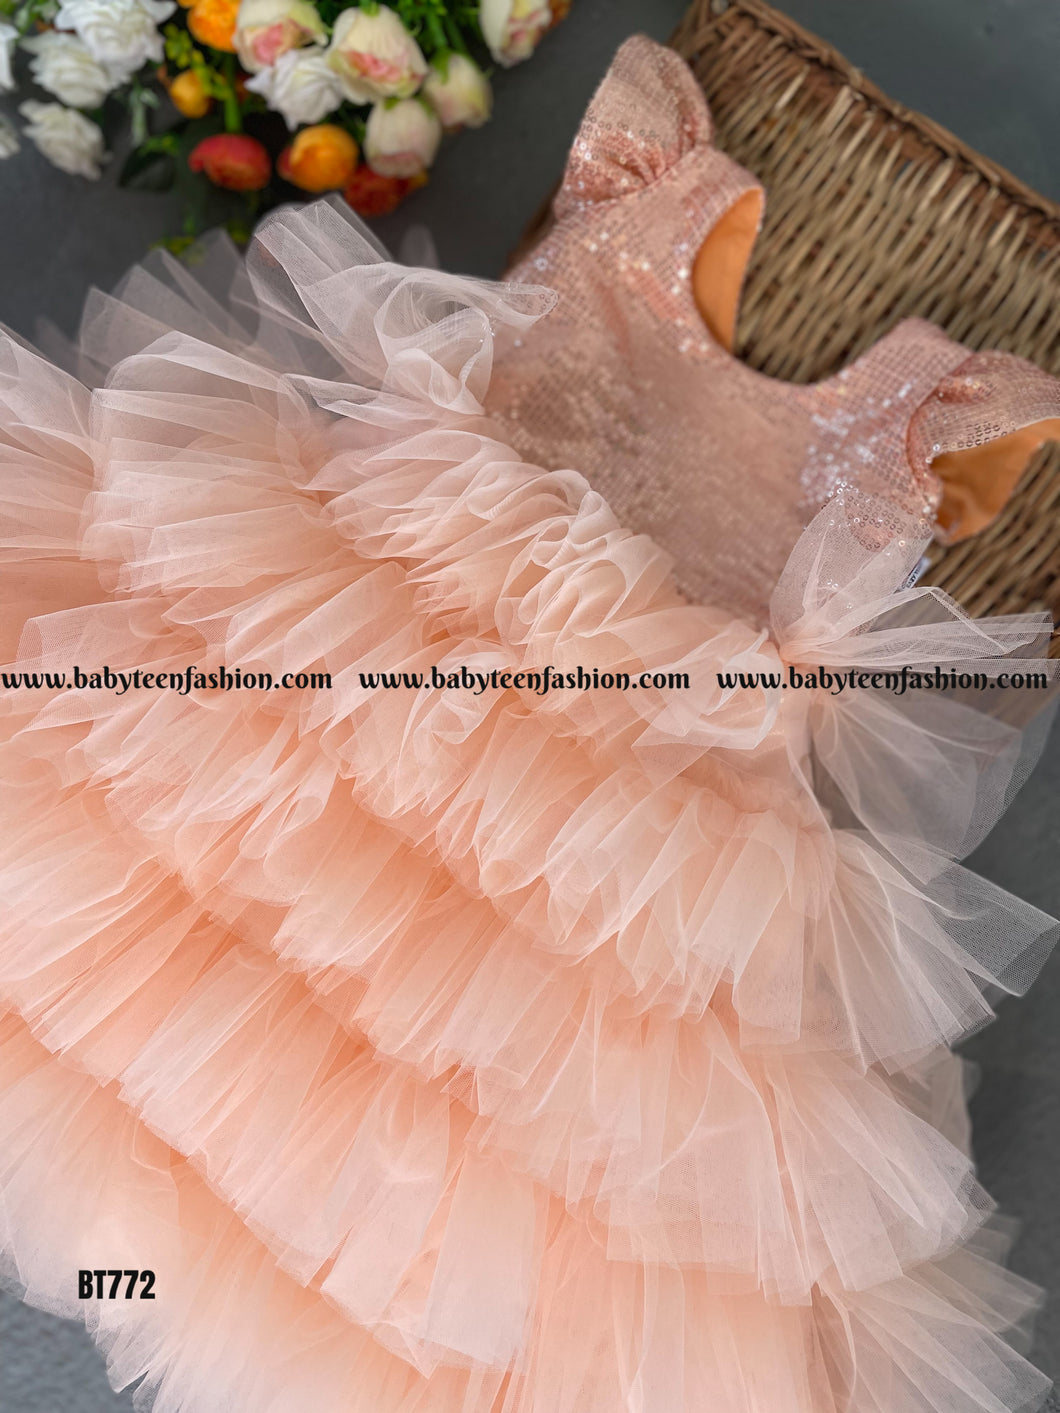 BT772 Peachy Keen Sparkle: Festive Frock for Tiny Trendsetters